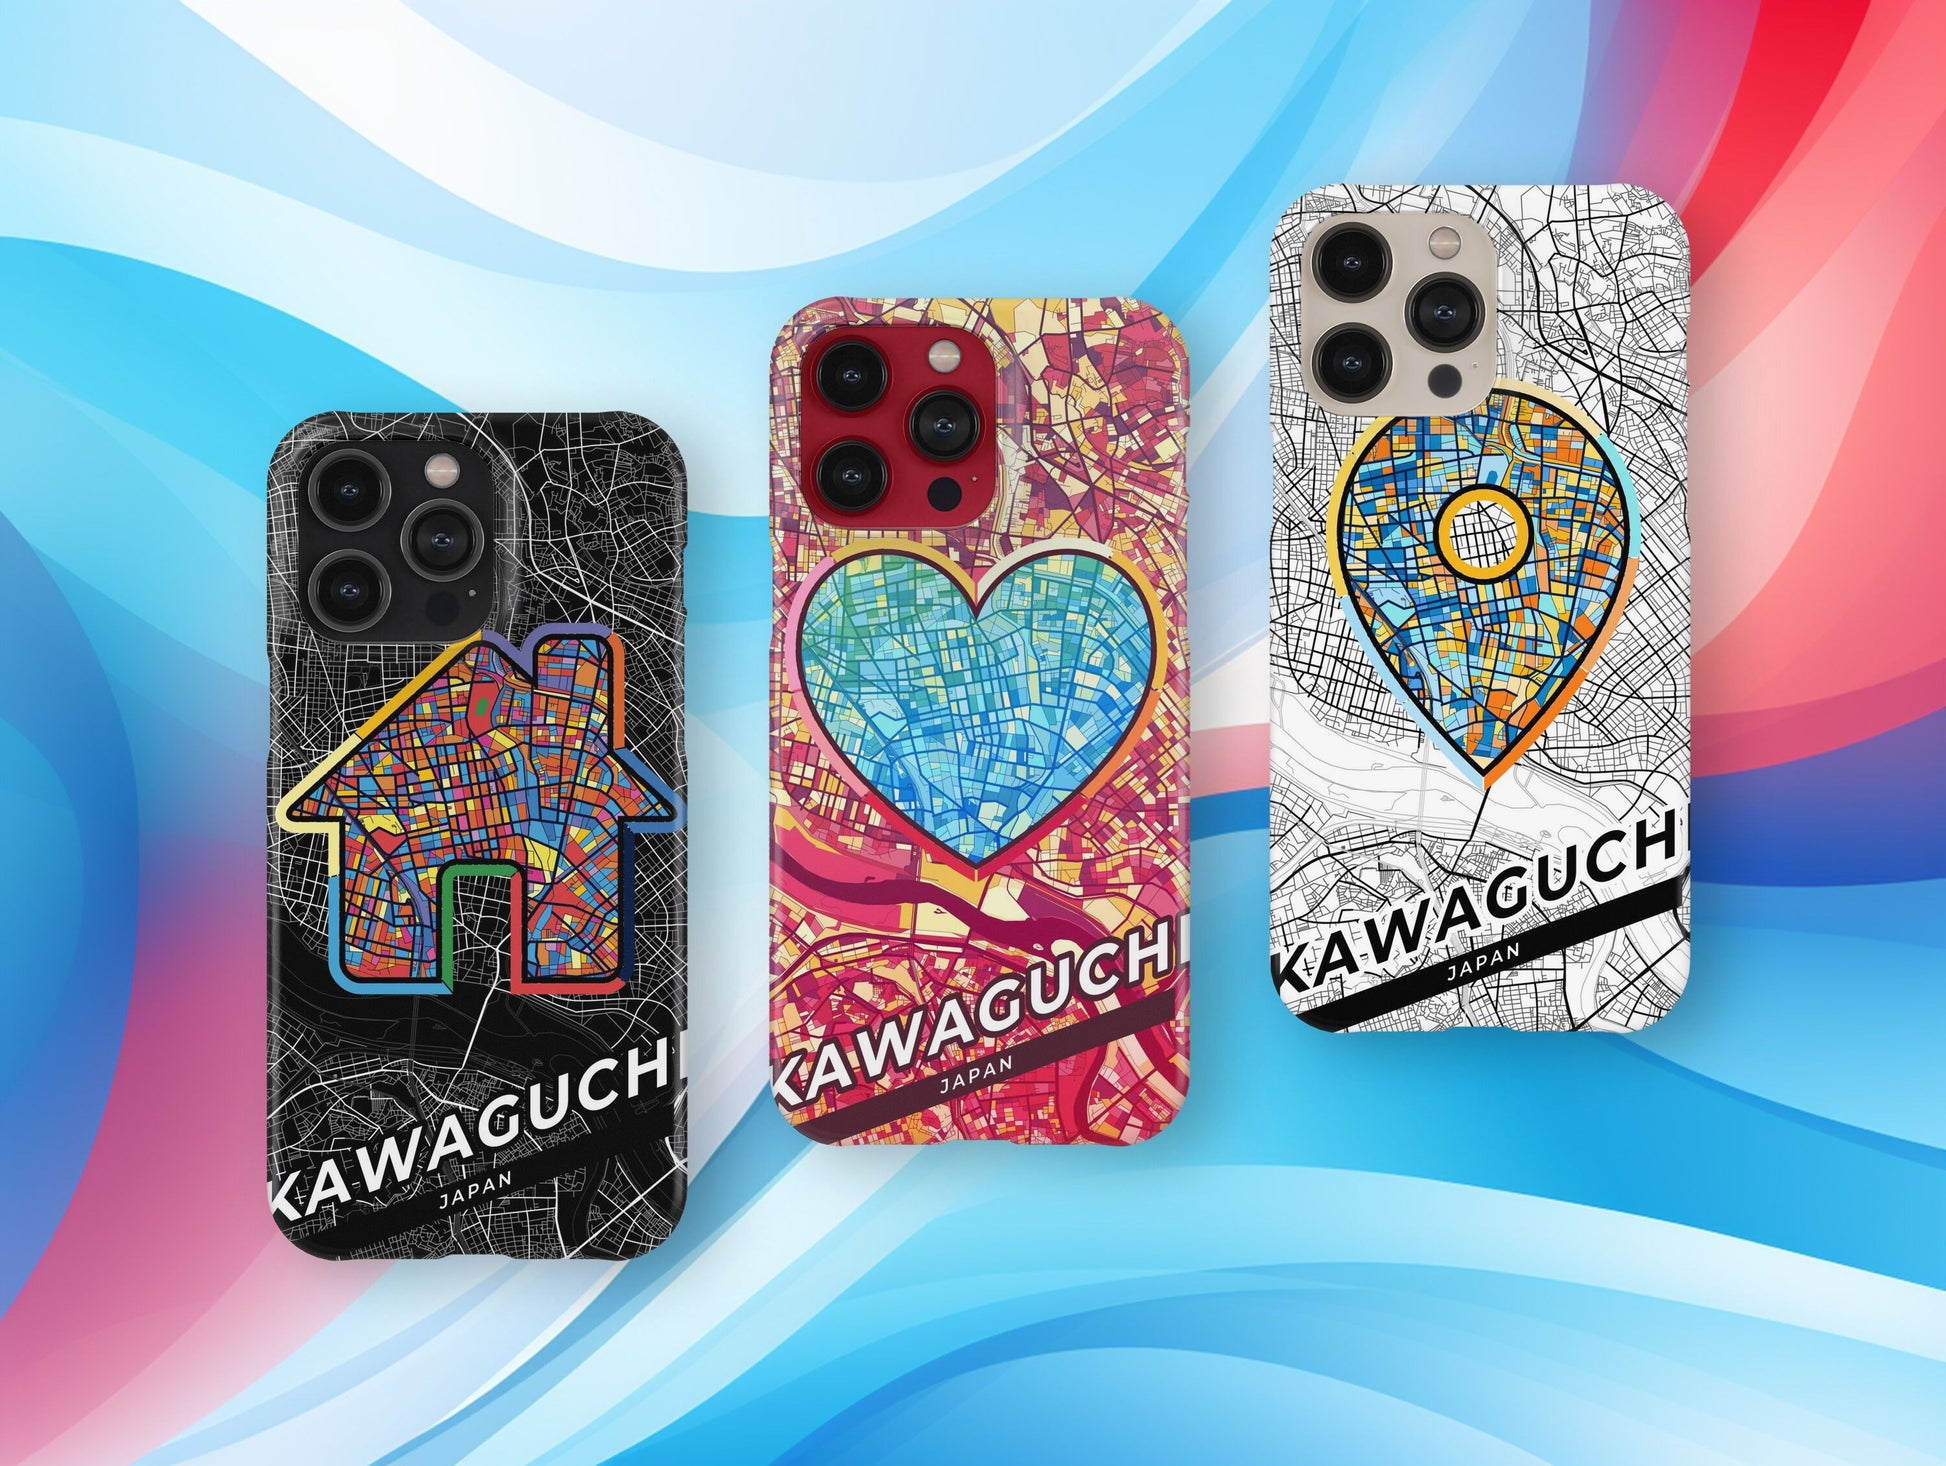 Kawaguchi Japan slim phone case with colorful icon. Birthday, wedding or housewarming gift. Couple match cases.